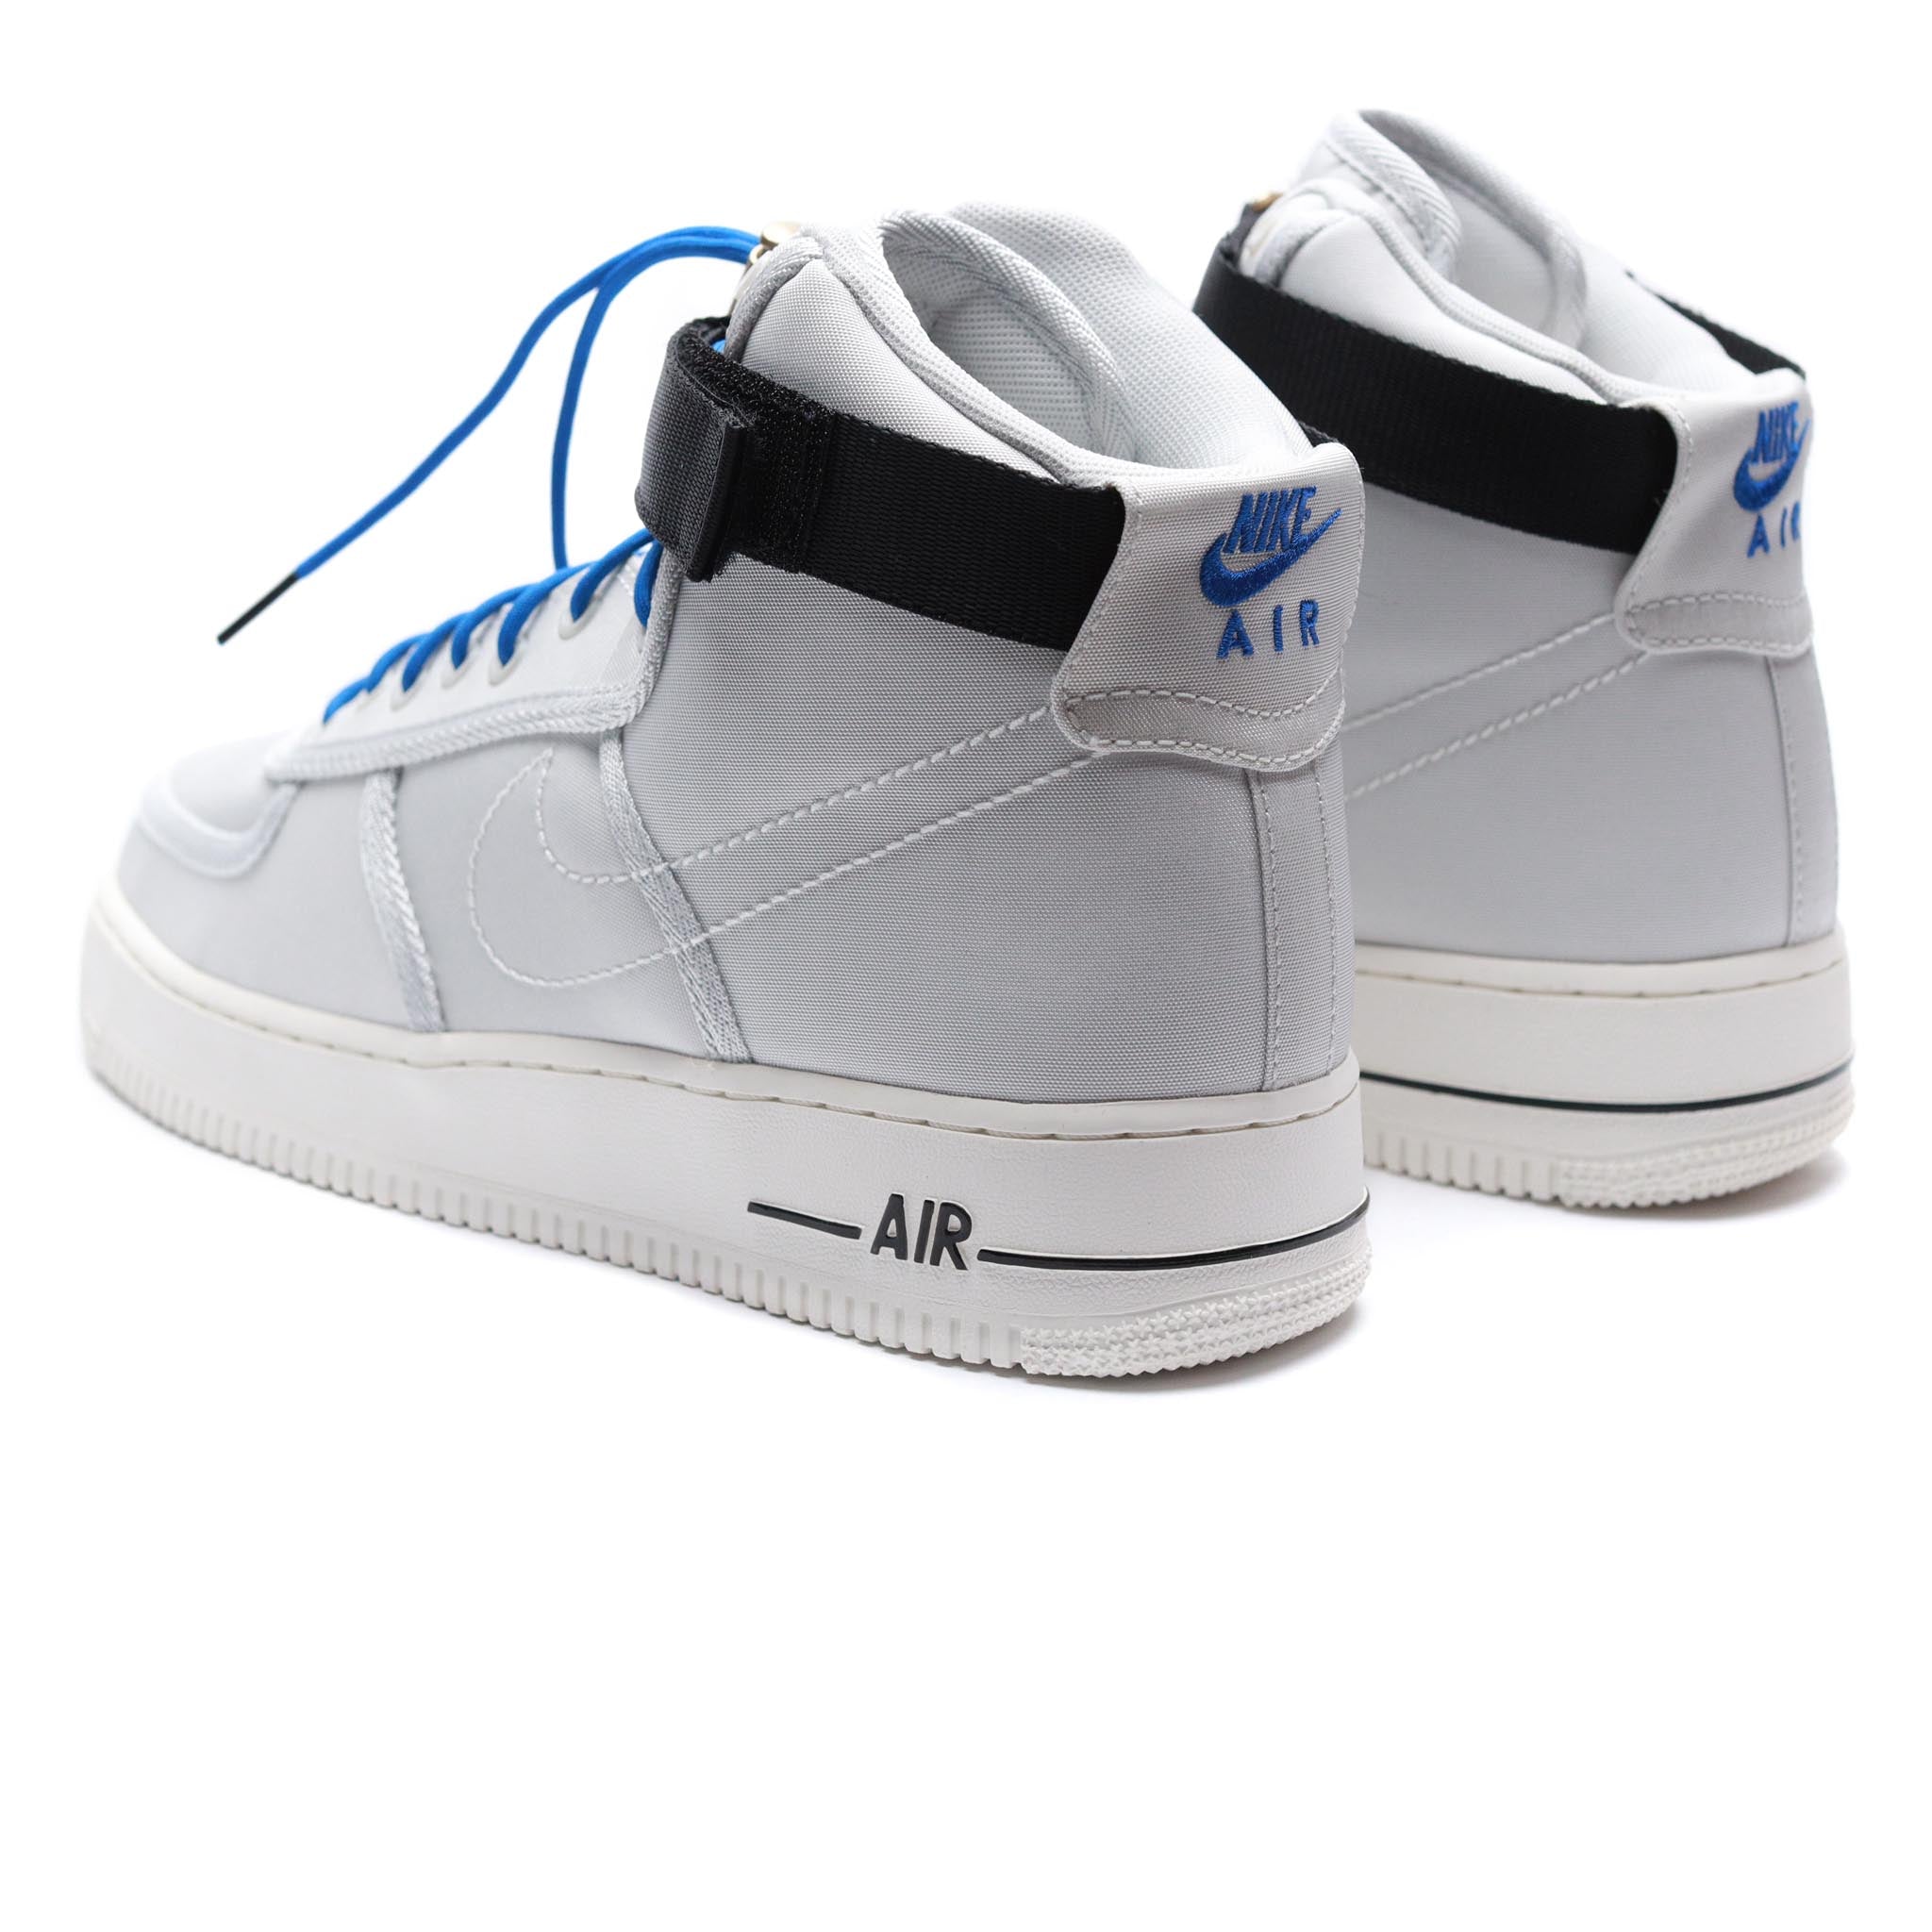 Nike Air Force 1 High '07 LV8 'Moving Company' Photon Dust/Game Royal